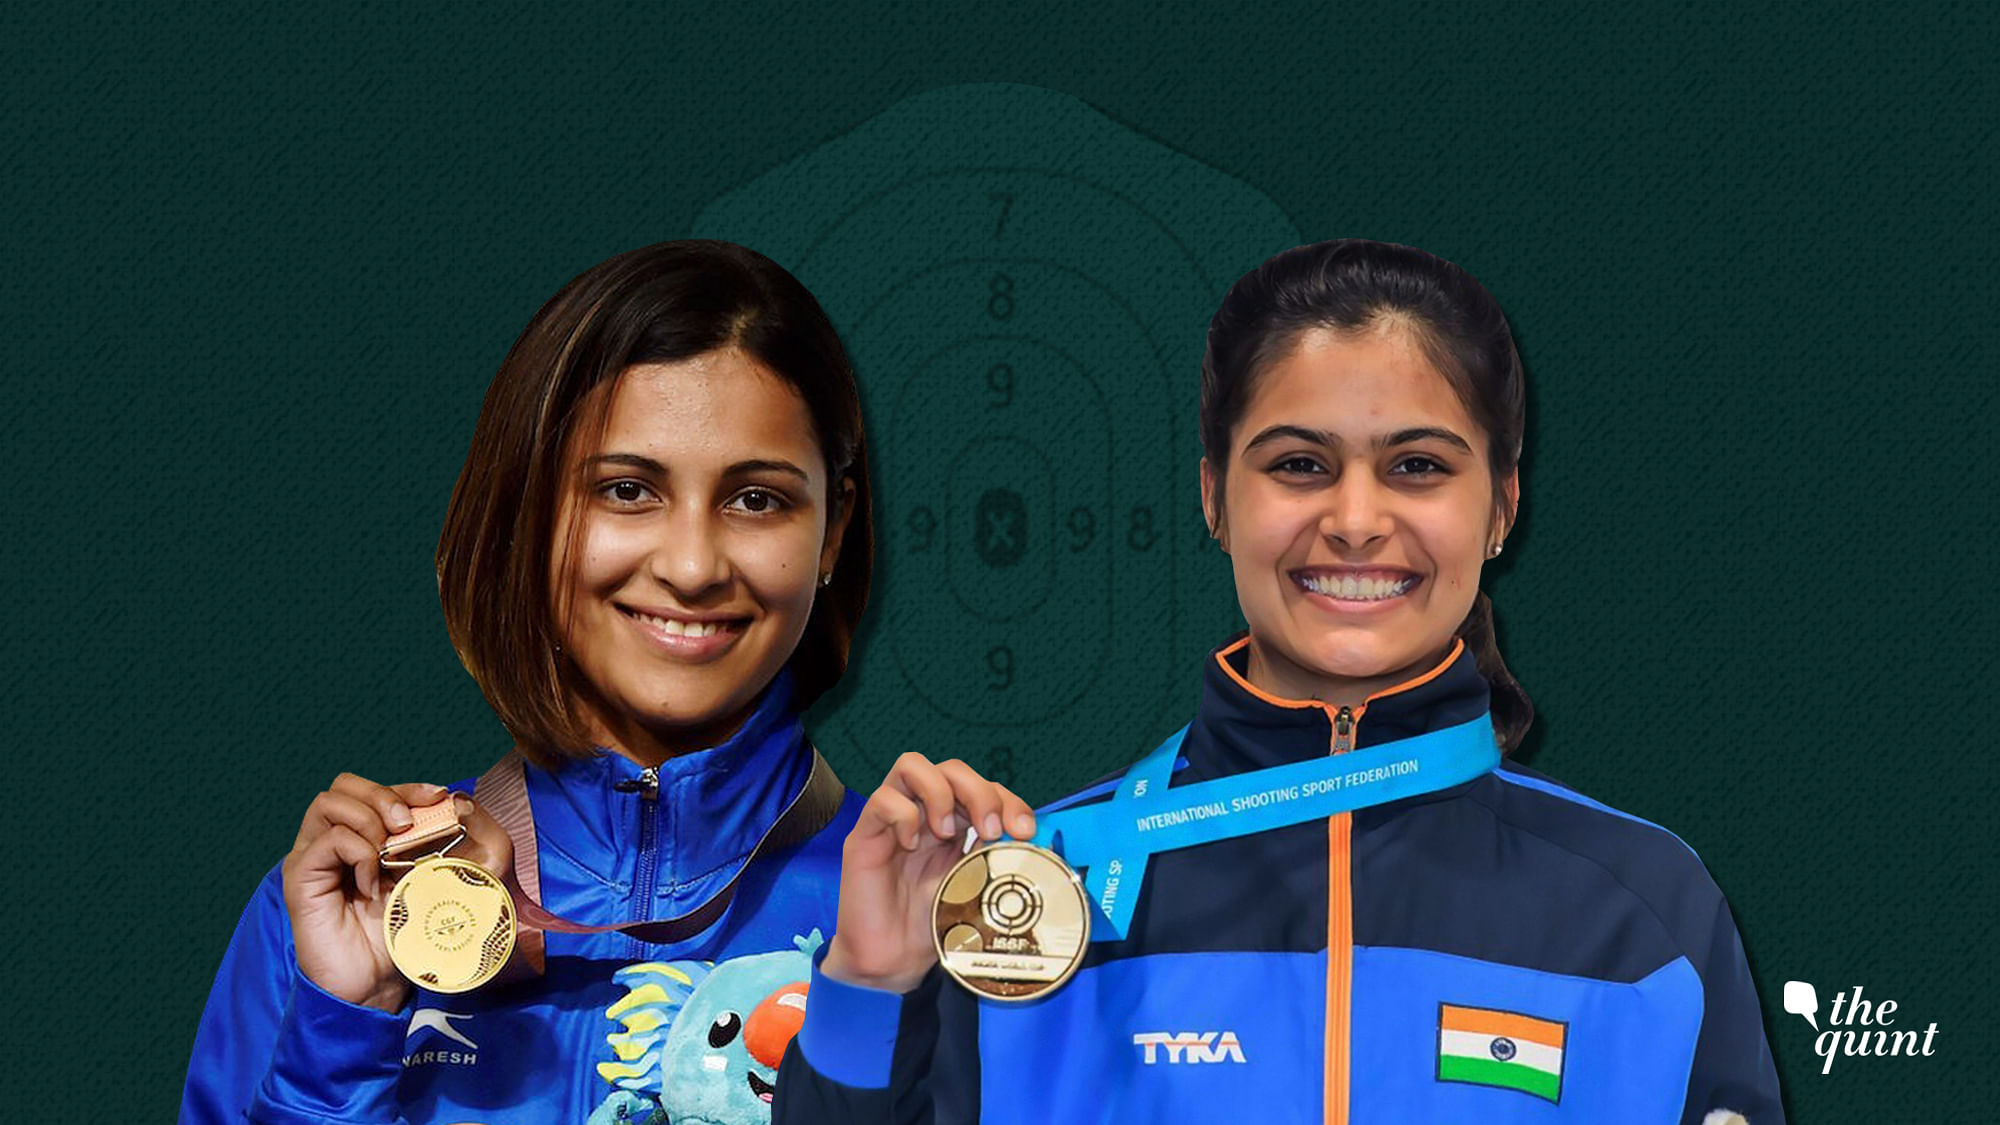 5 Indian shooters to watch out for at the <a href="https://www.thequint.com/sports/asian-games">2018 Asian Games</a>.